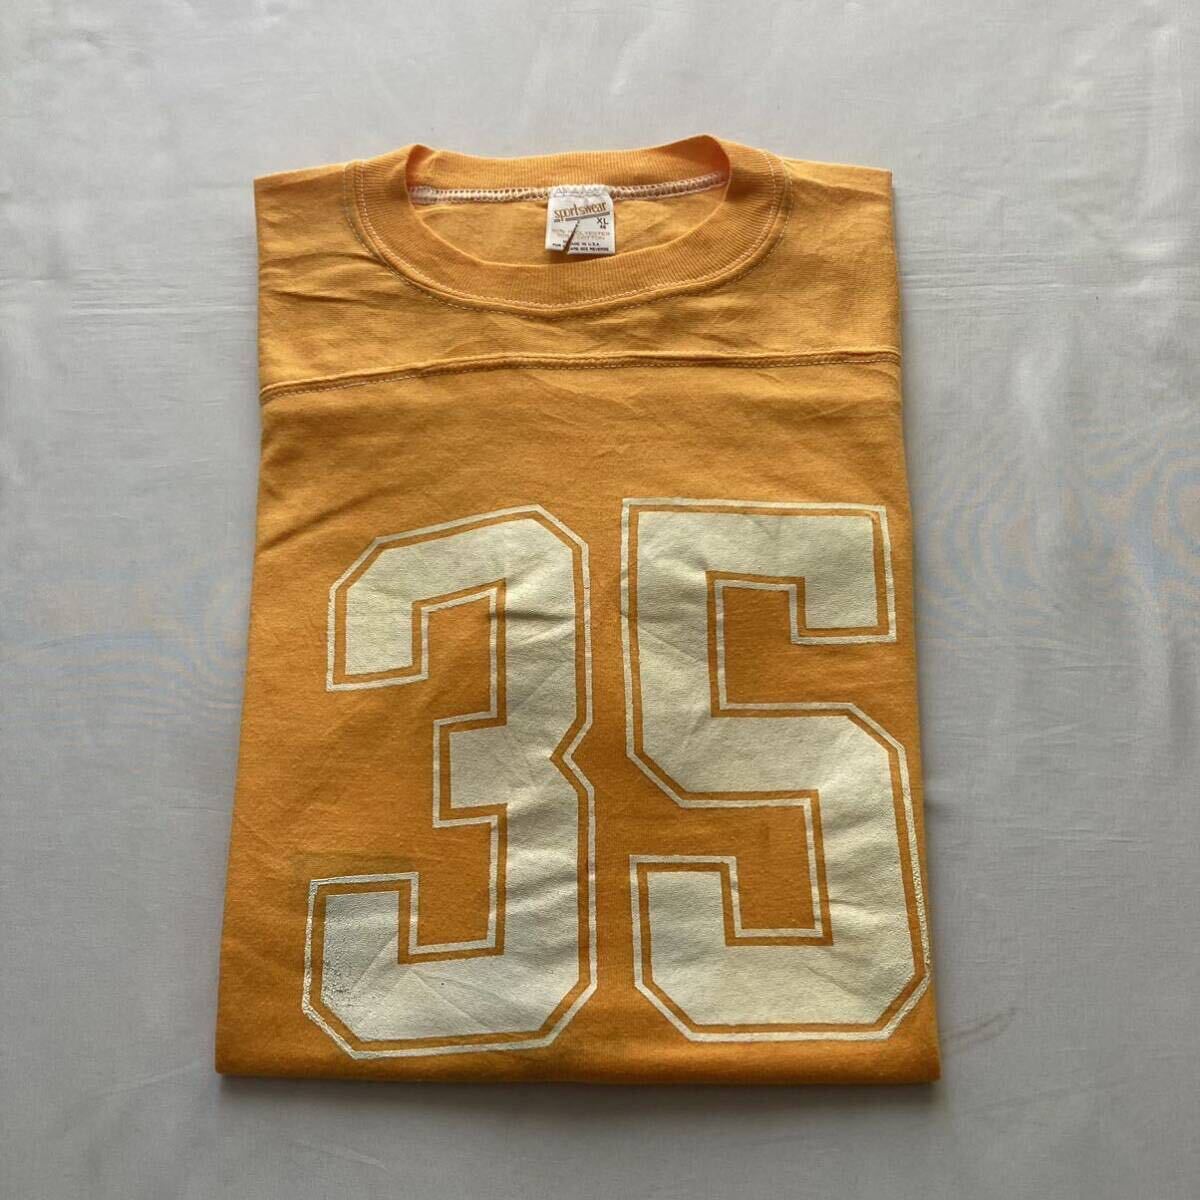  beautiful goods both sides print number ring rare color yellow color yellow 70\'s80\'s Vintage VINTAGE America made USA made football T-shirt XL size 